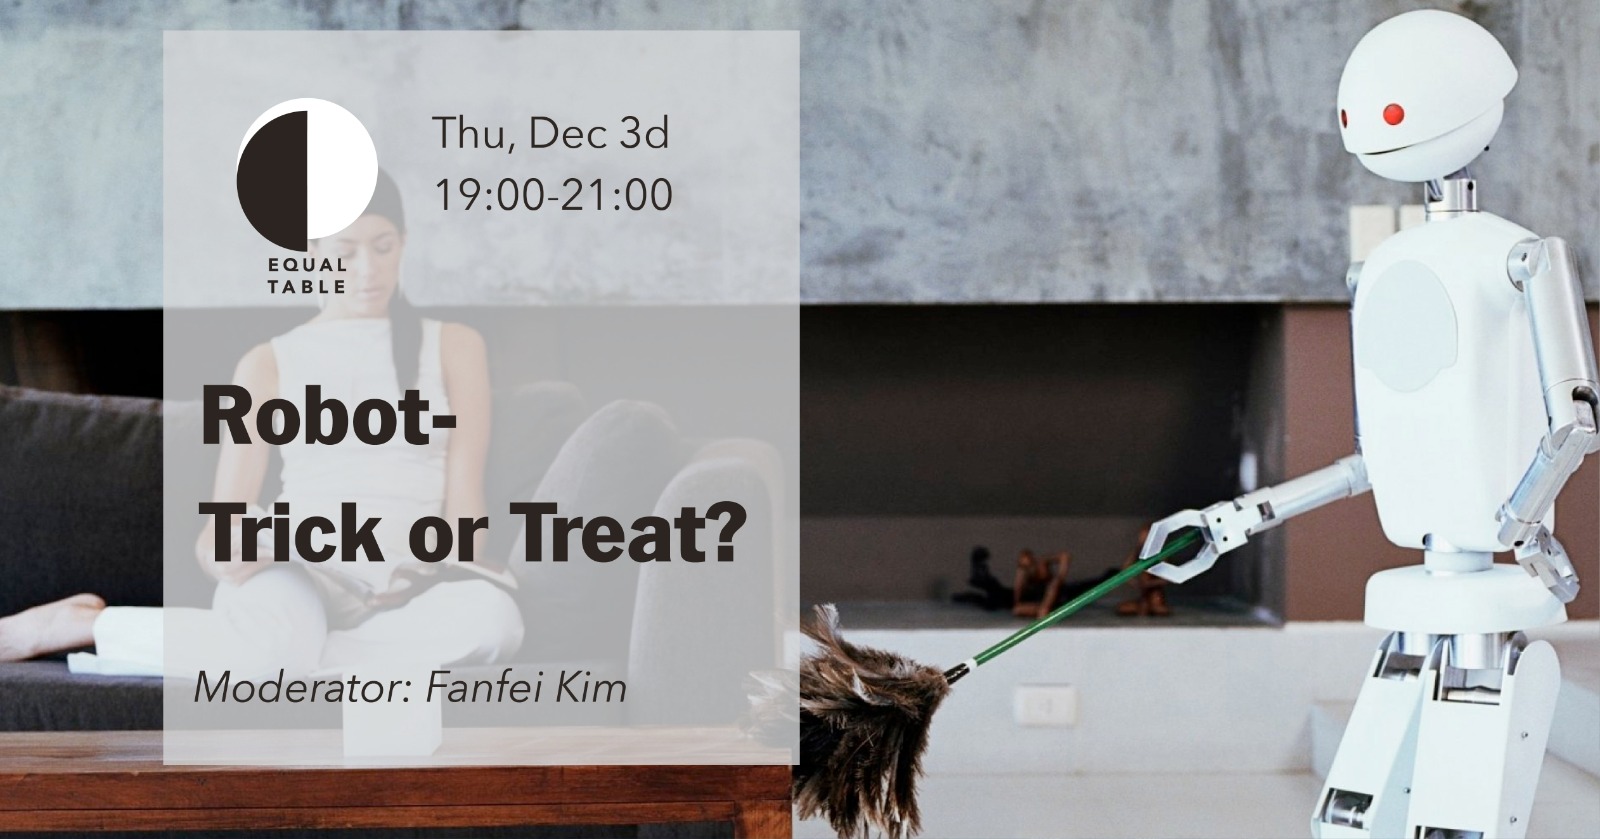 Equal Table Event: Robots – Trick or Treat? by Fanfei Kim